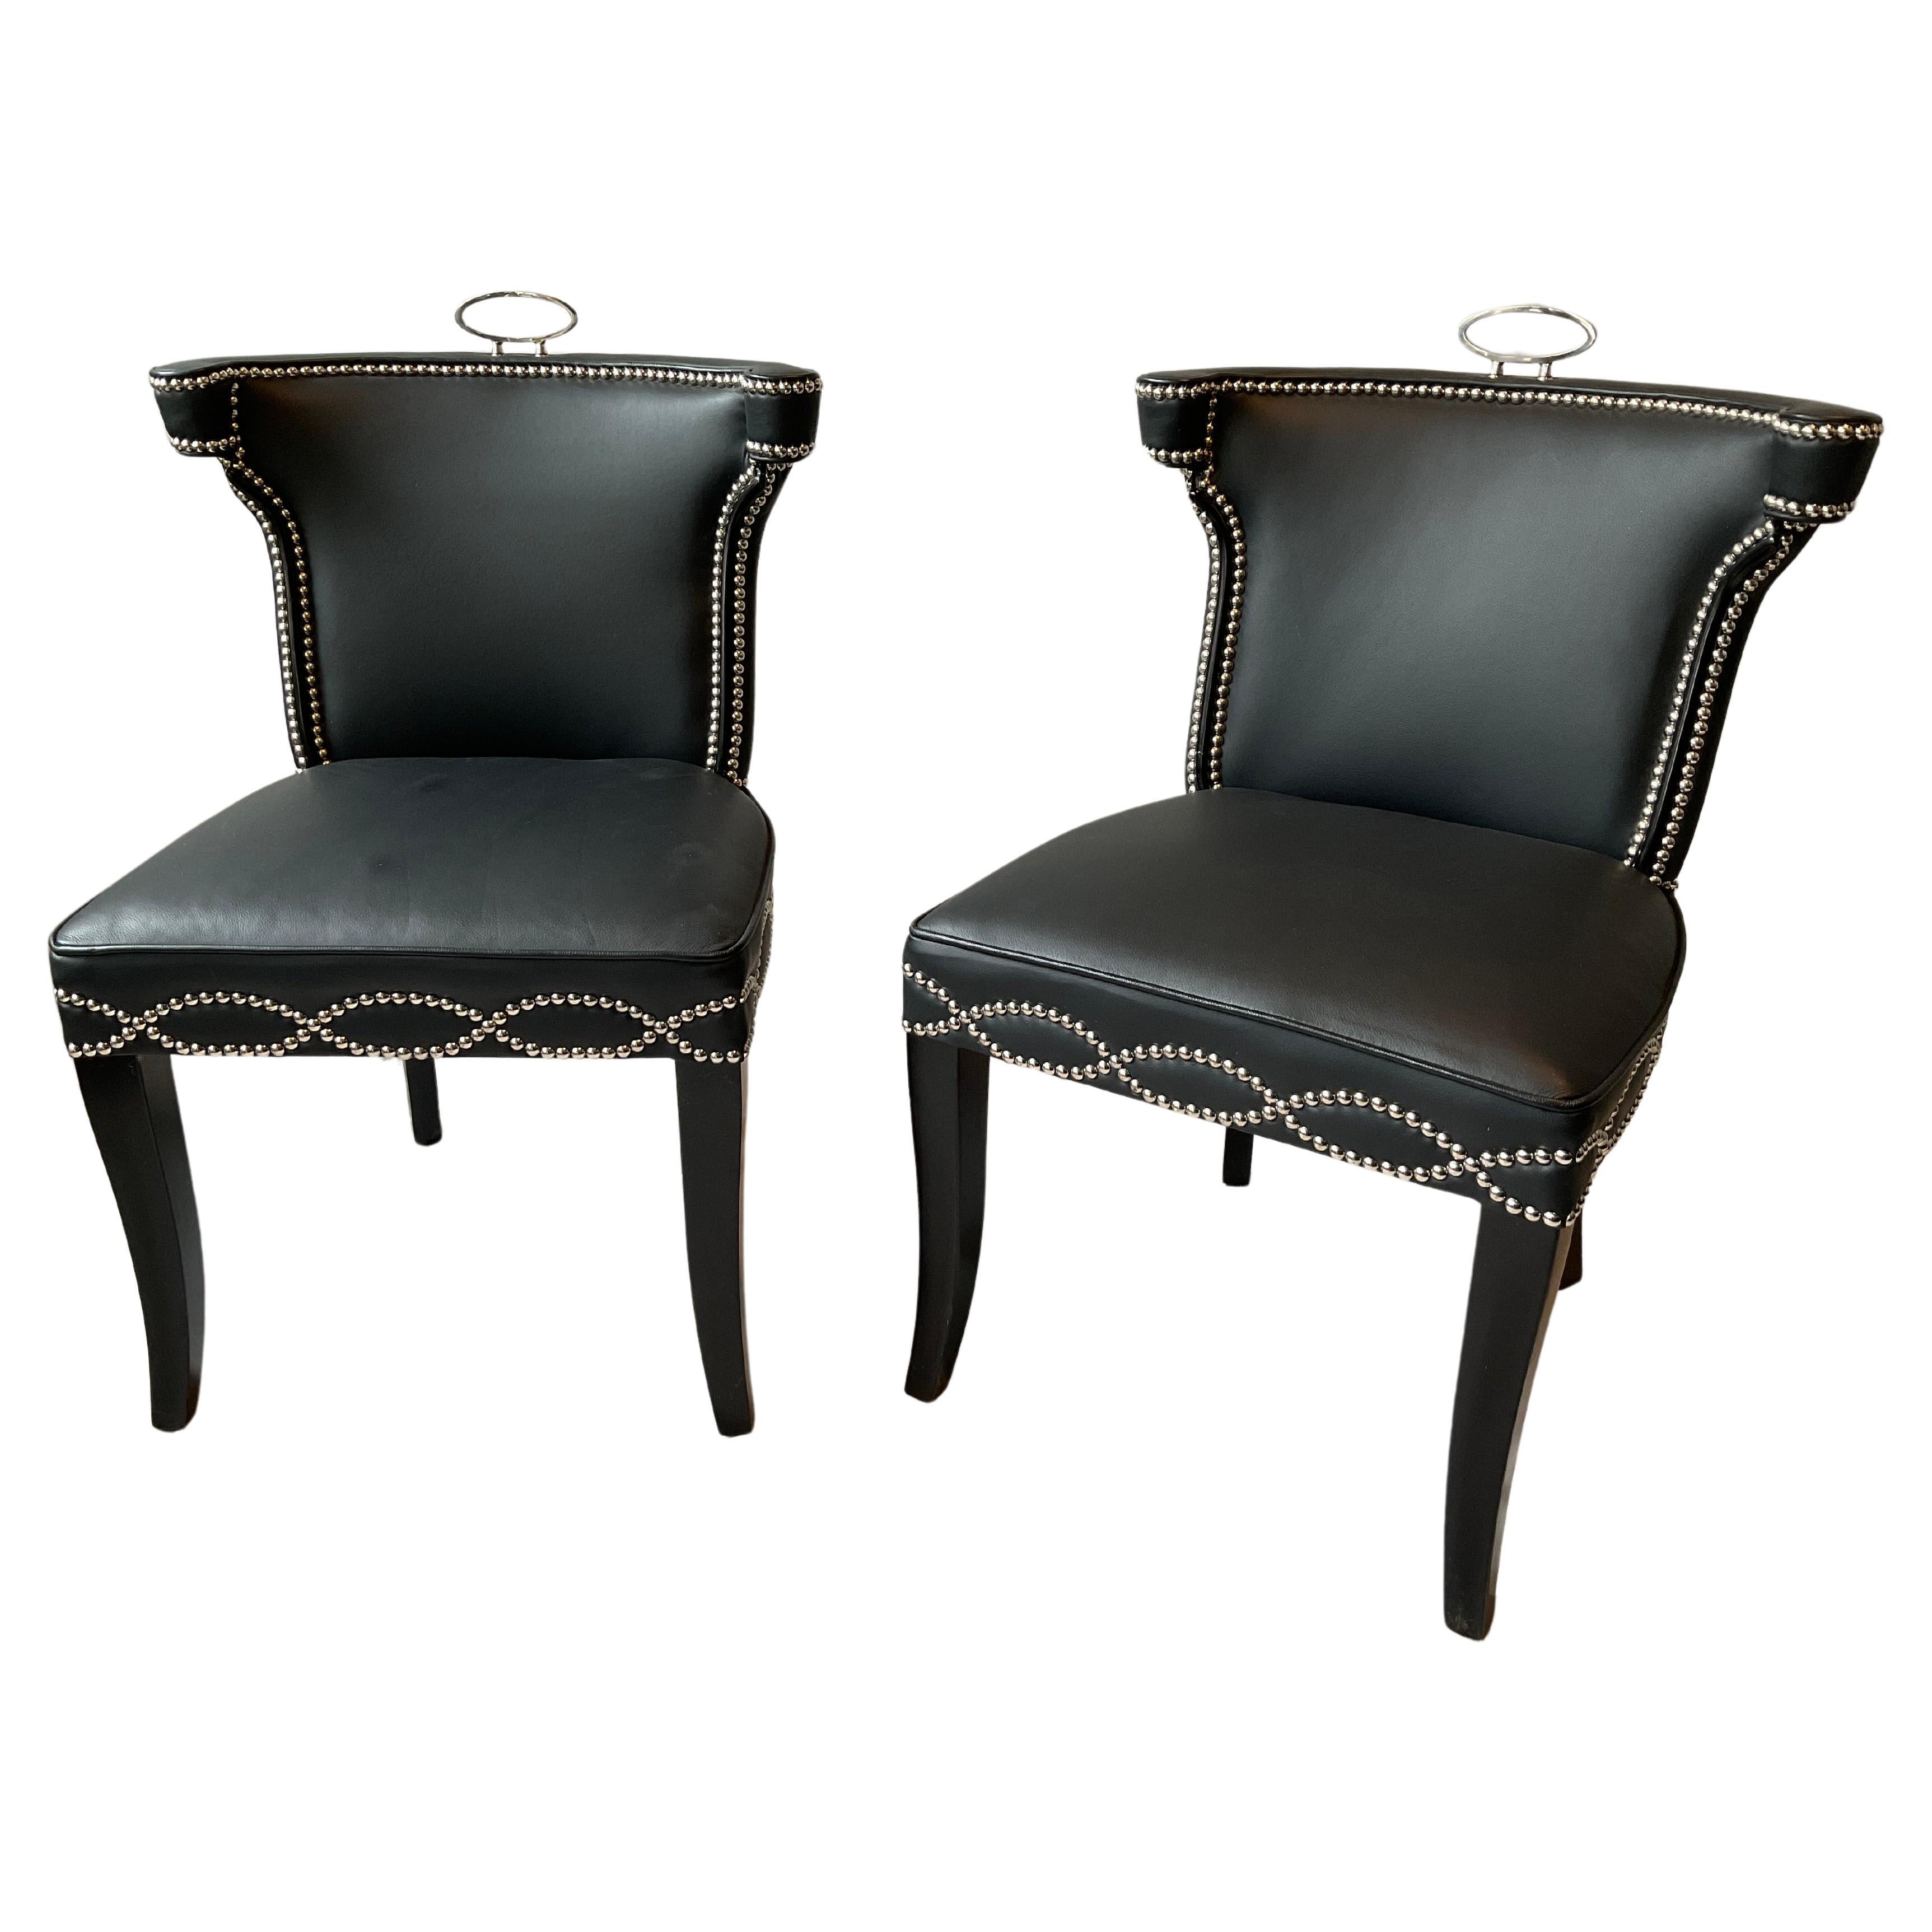 Pair Of Global Views Casino Black Leather Chairs